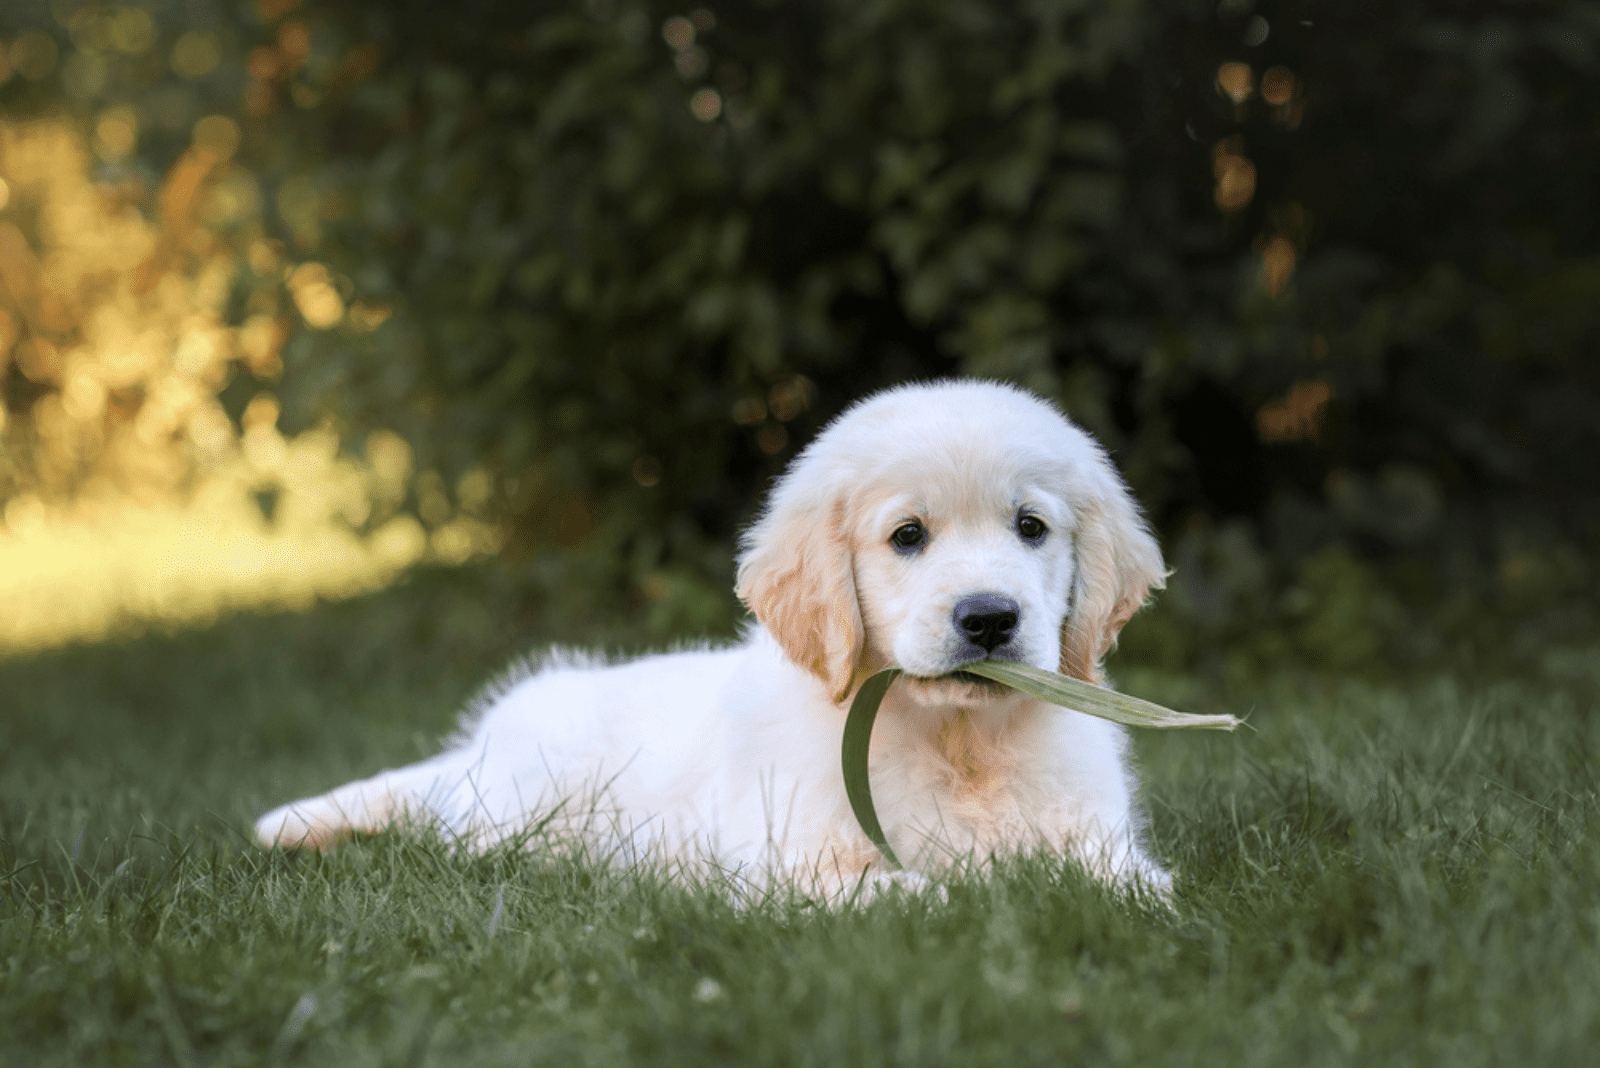 labrador puppy sitting on grass and holding grass in mouth